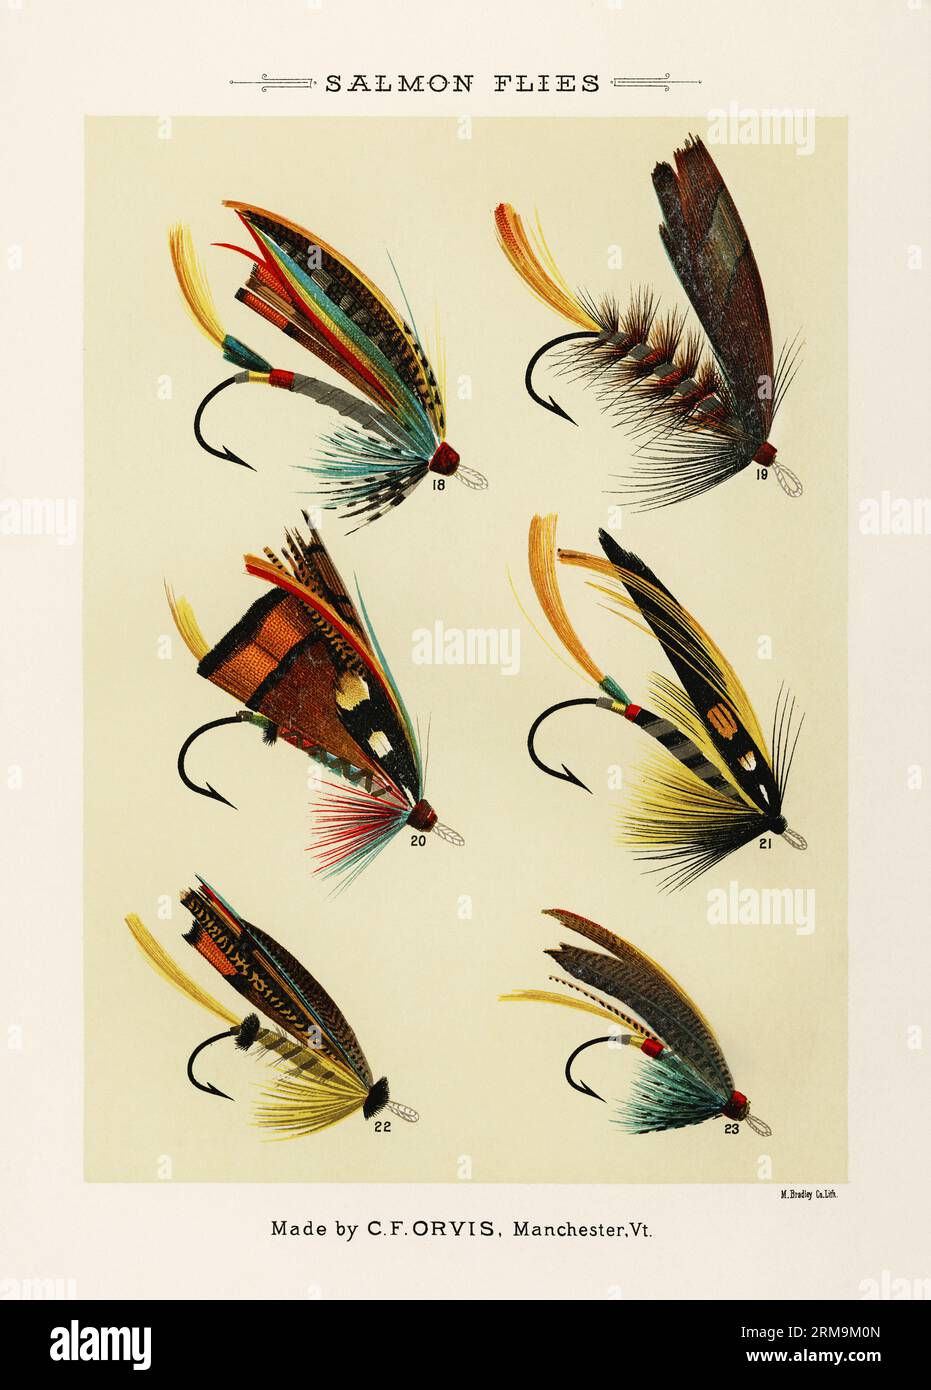 https://c8.alamy.com/comp/2RM9M0N/vintage-illustration-of-fly-fishing-hooks-assorted-barbed-fly-hooks-with-different-sizes-and-eyelets-for-artificial-fly-patterns-in-fly-fishing-ca-2RM9M0N.jpg